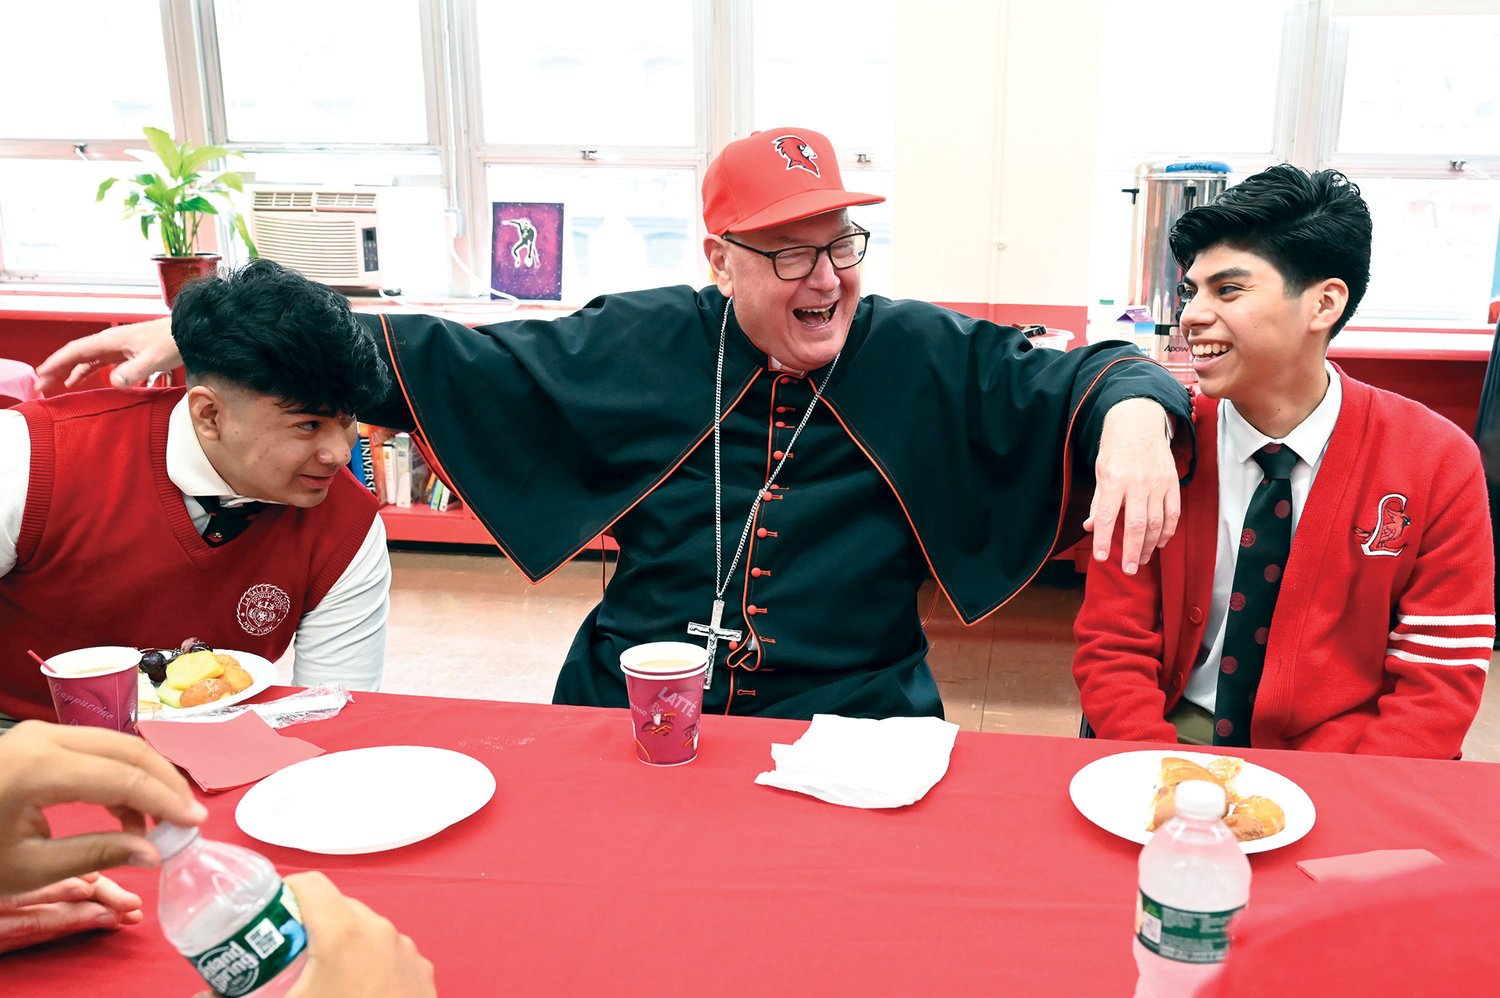 Cardinal Dolan sits down for brunch and a chat with students Giovanni Gonzalez, left, and Carlos Apreza after Mass.